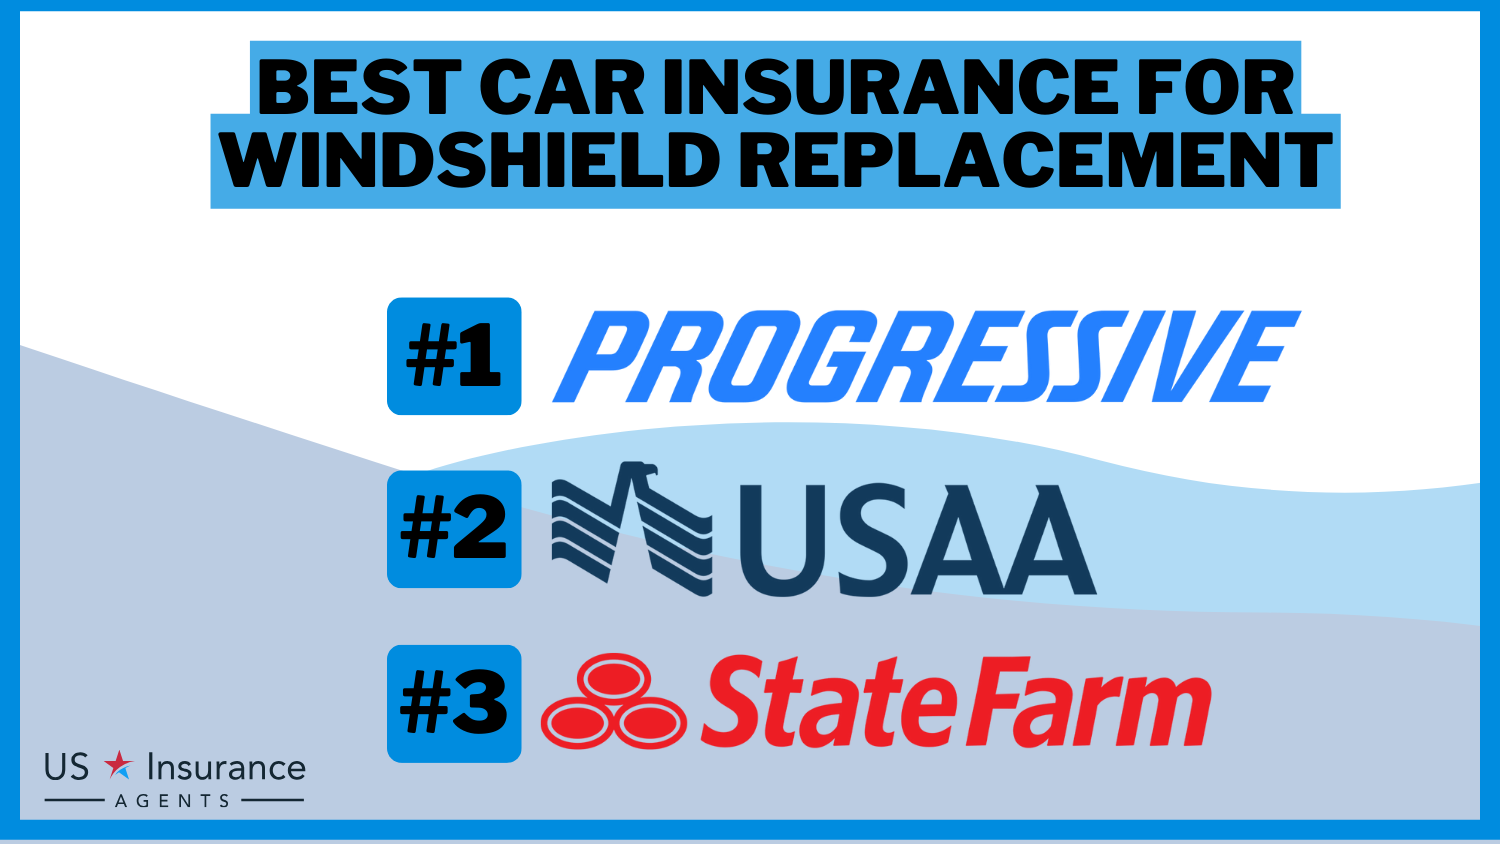 Best Car Insurance for Windshield Replacement: Progressive, USAA, and State Farm